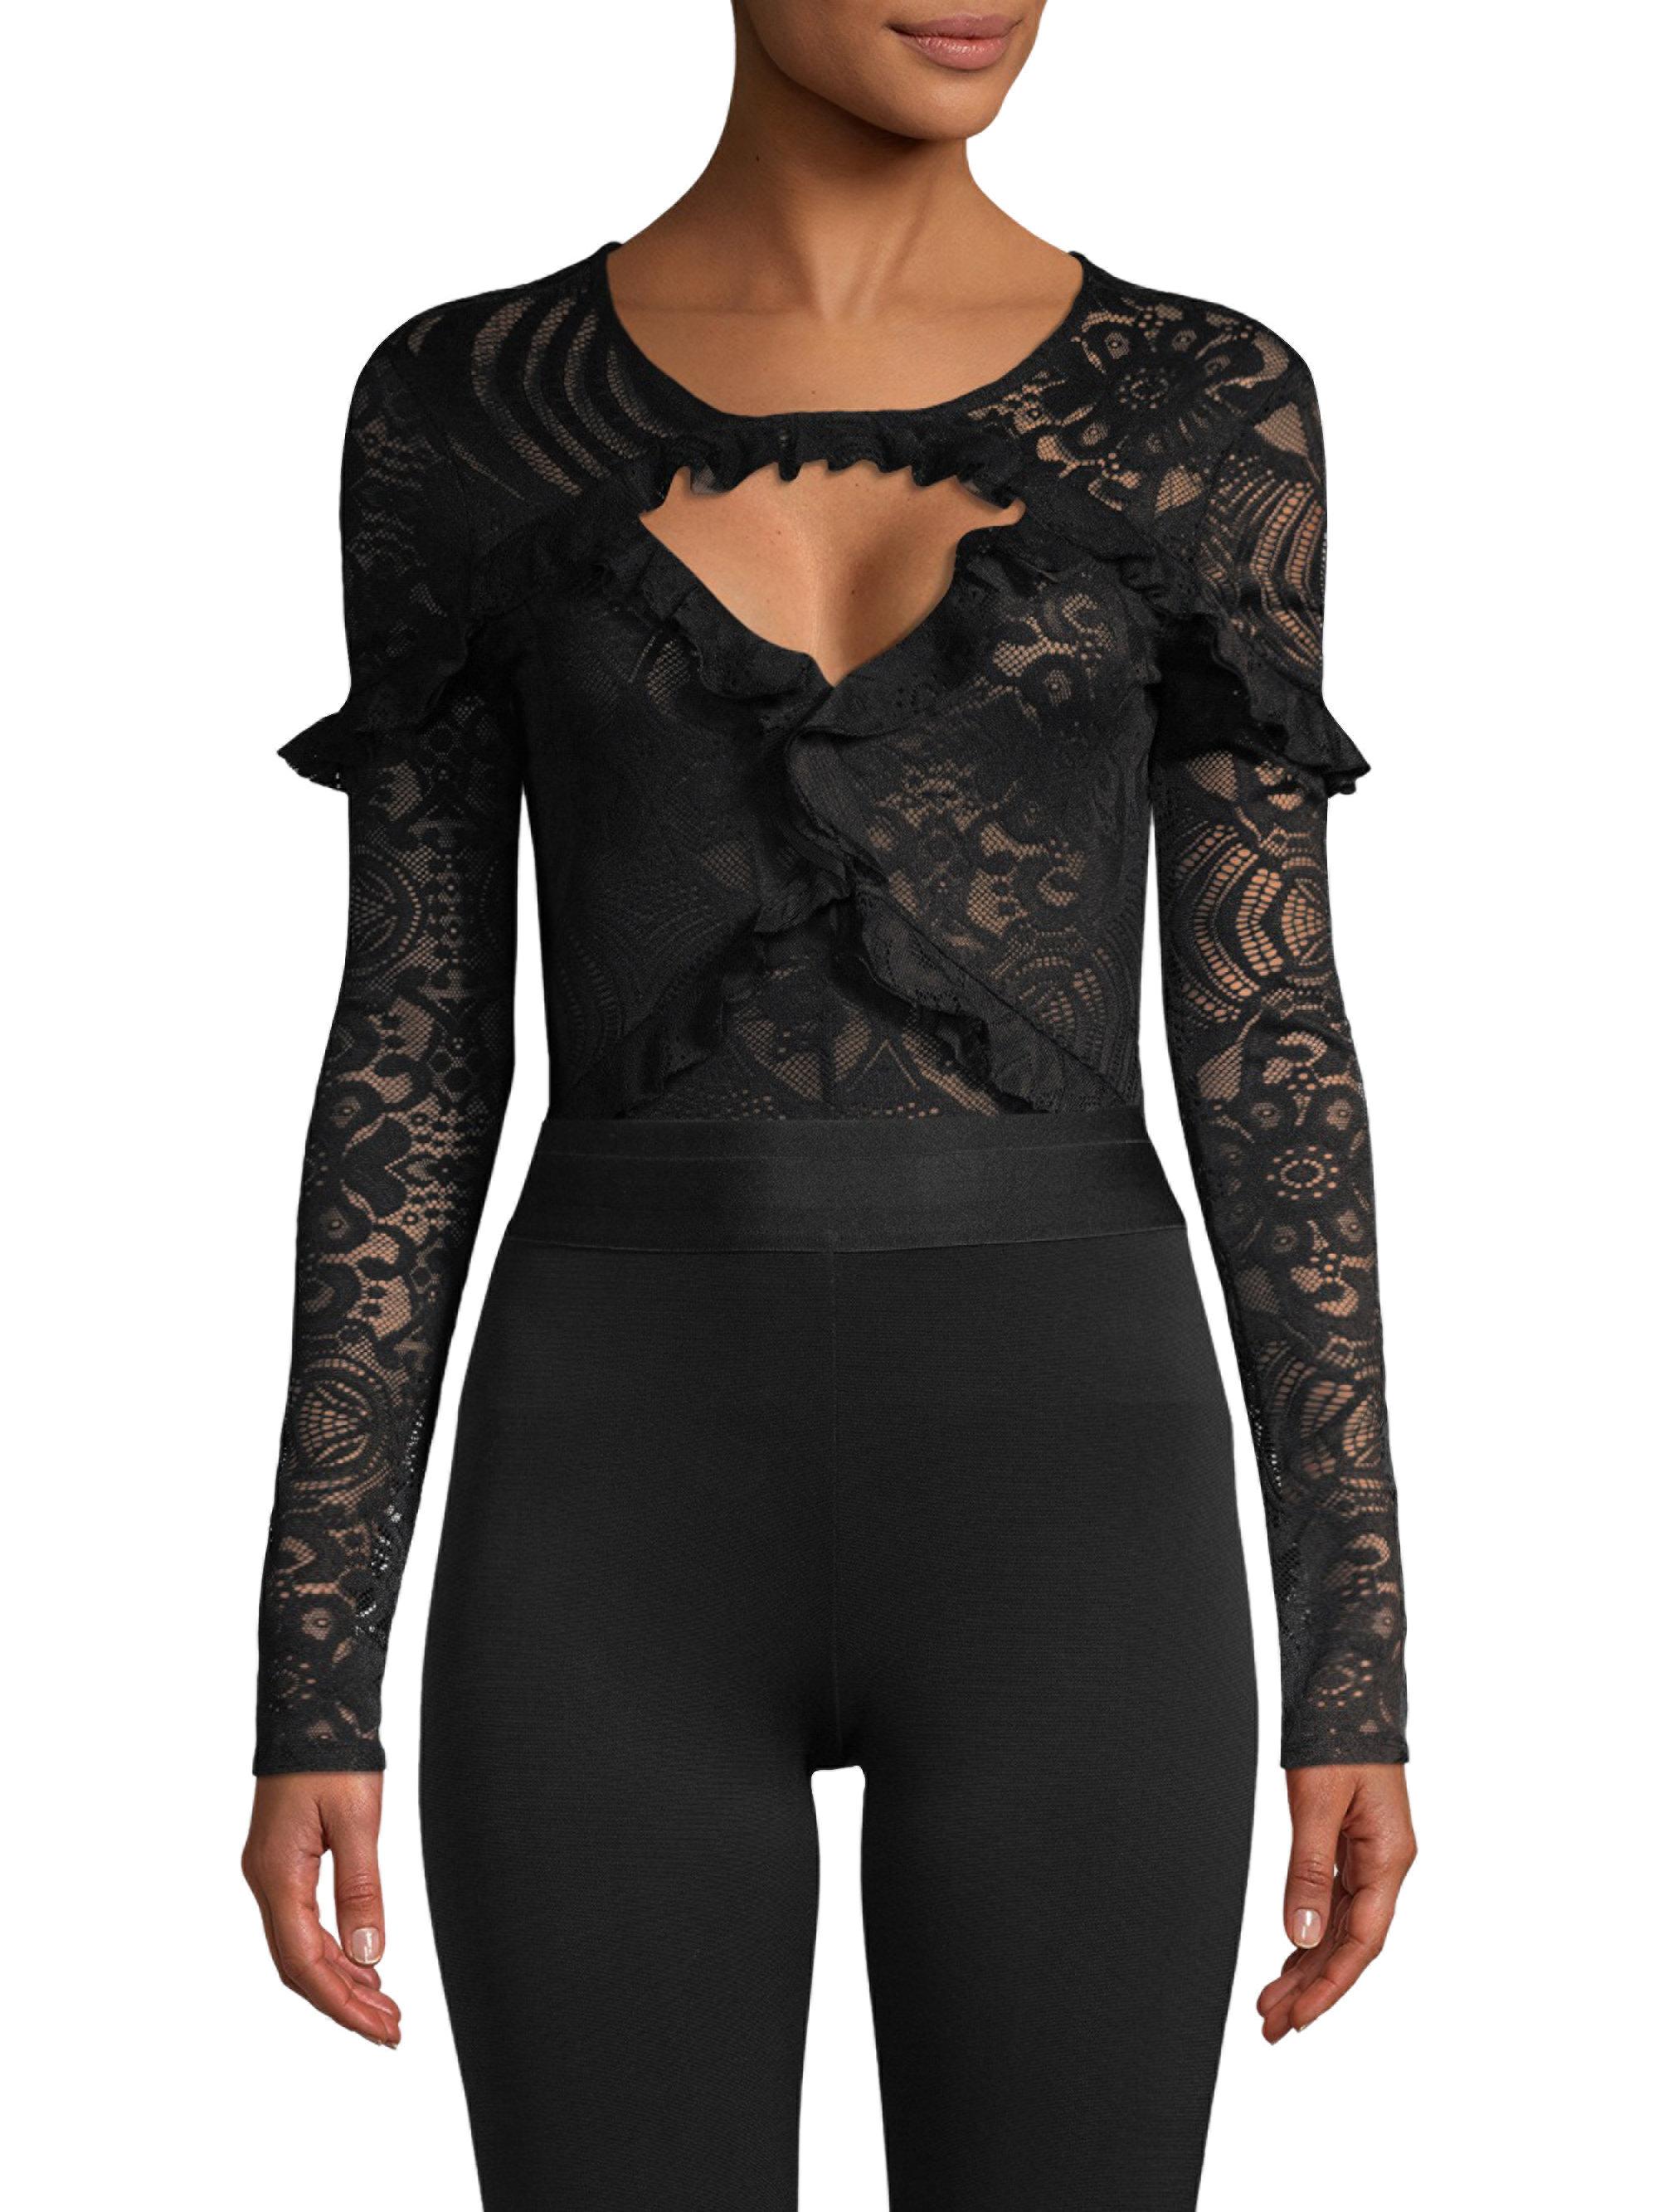 BCBGMAXAZRIA Abstract Floral Lace Bodysuit in Black - Lyst